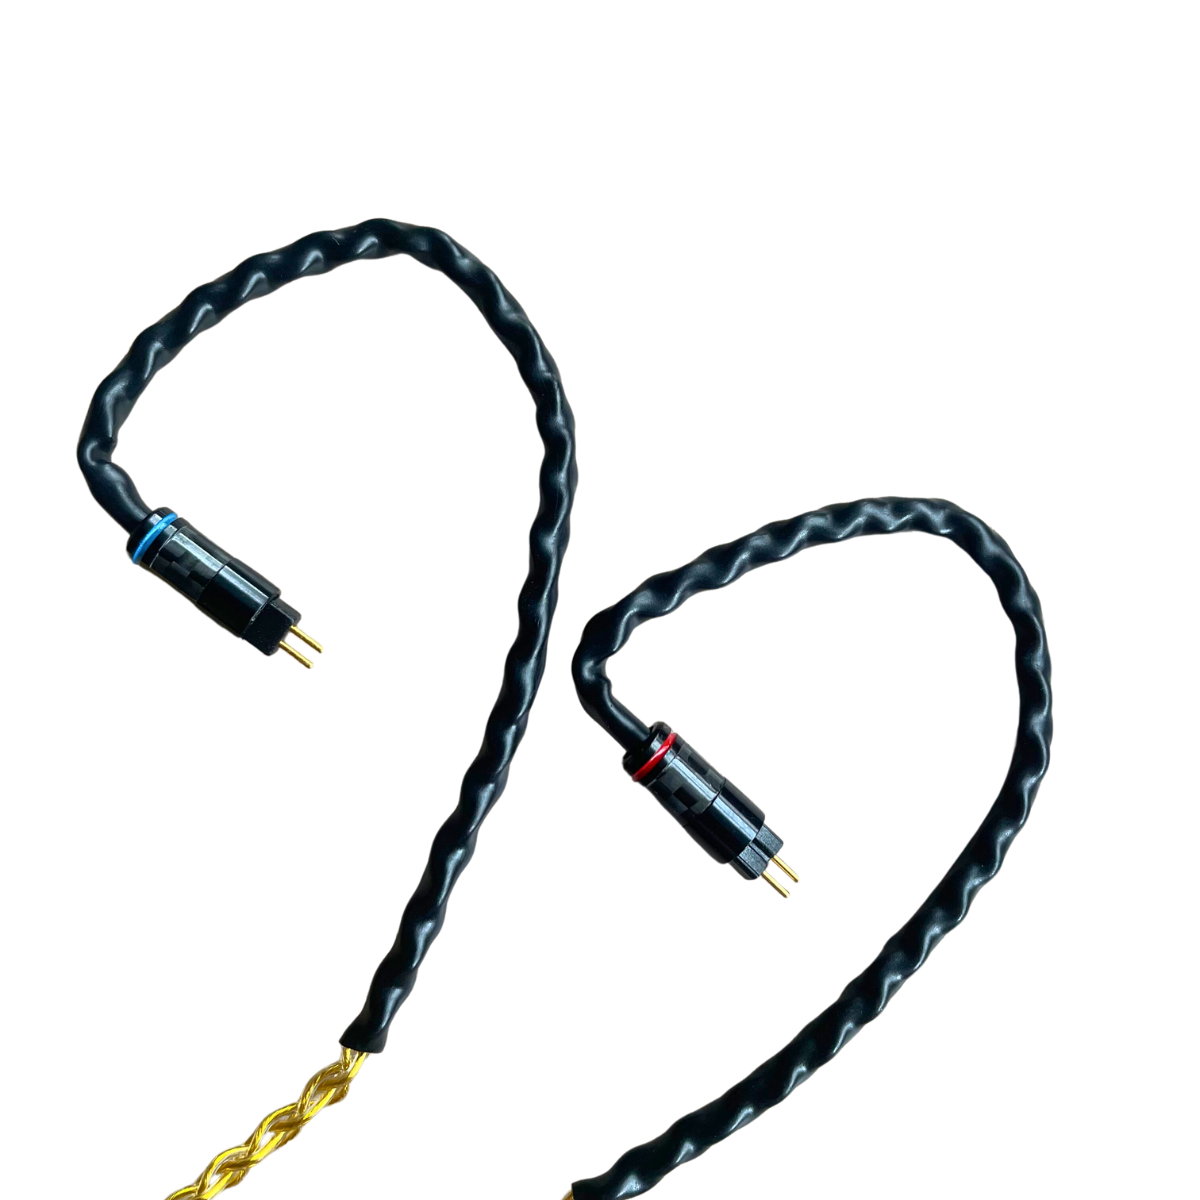 EarAudio AURUM Cable For In-Ear Monitors